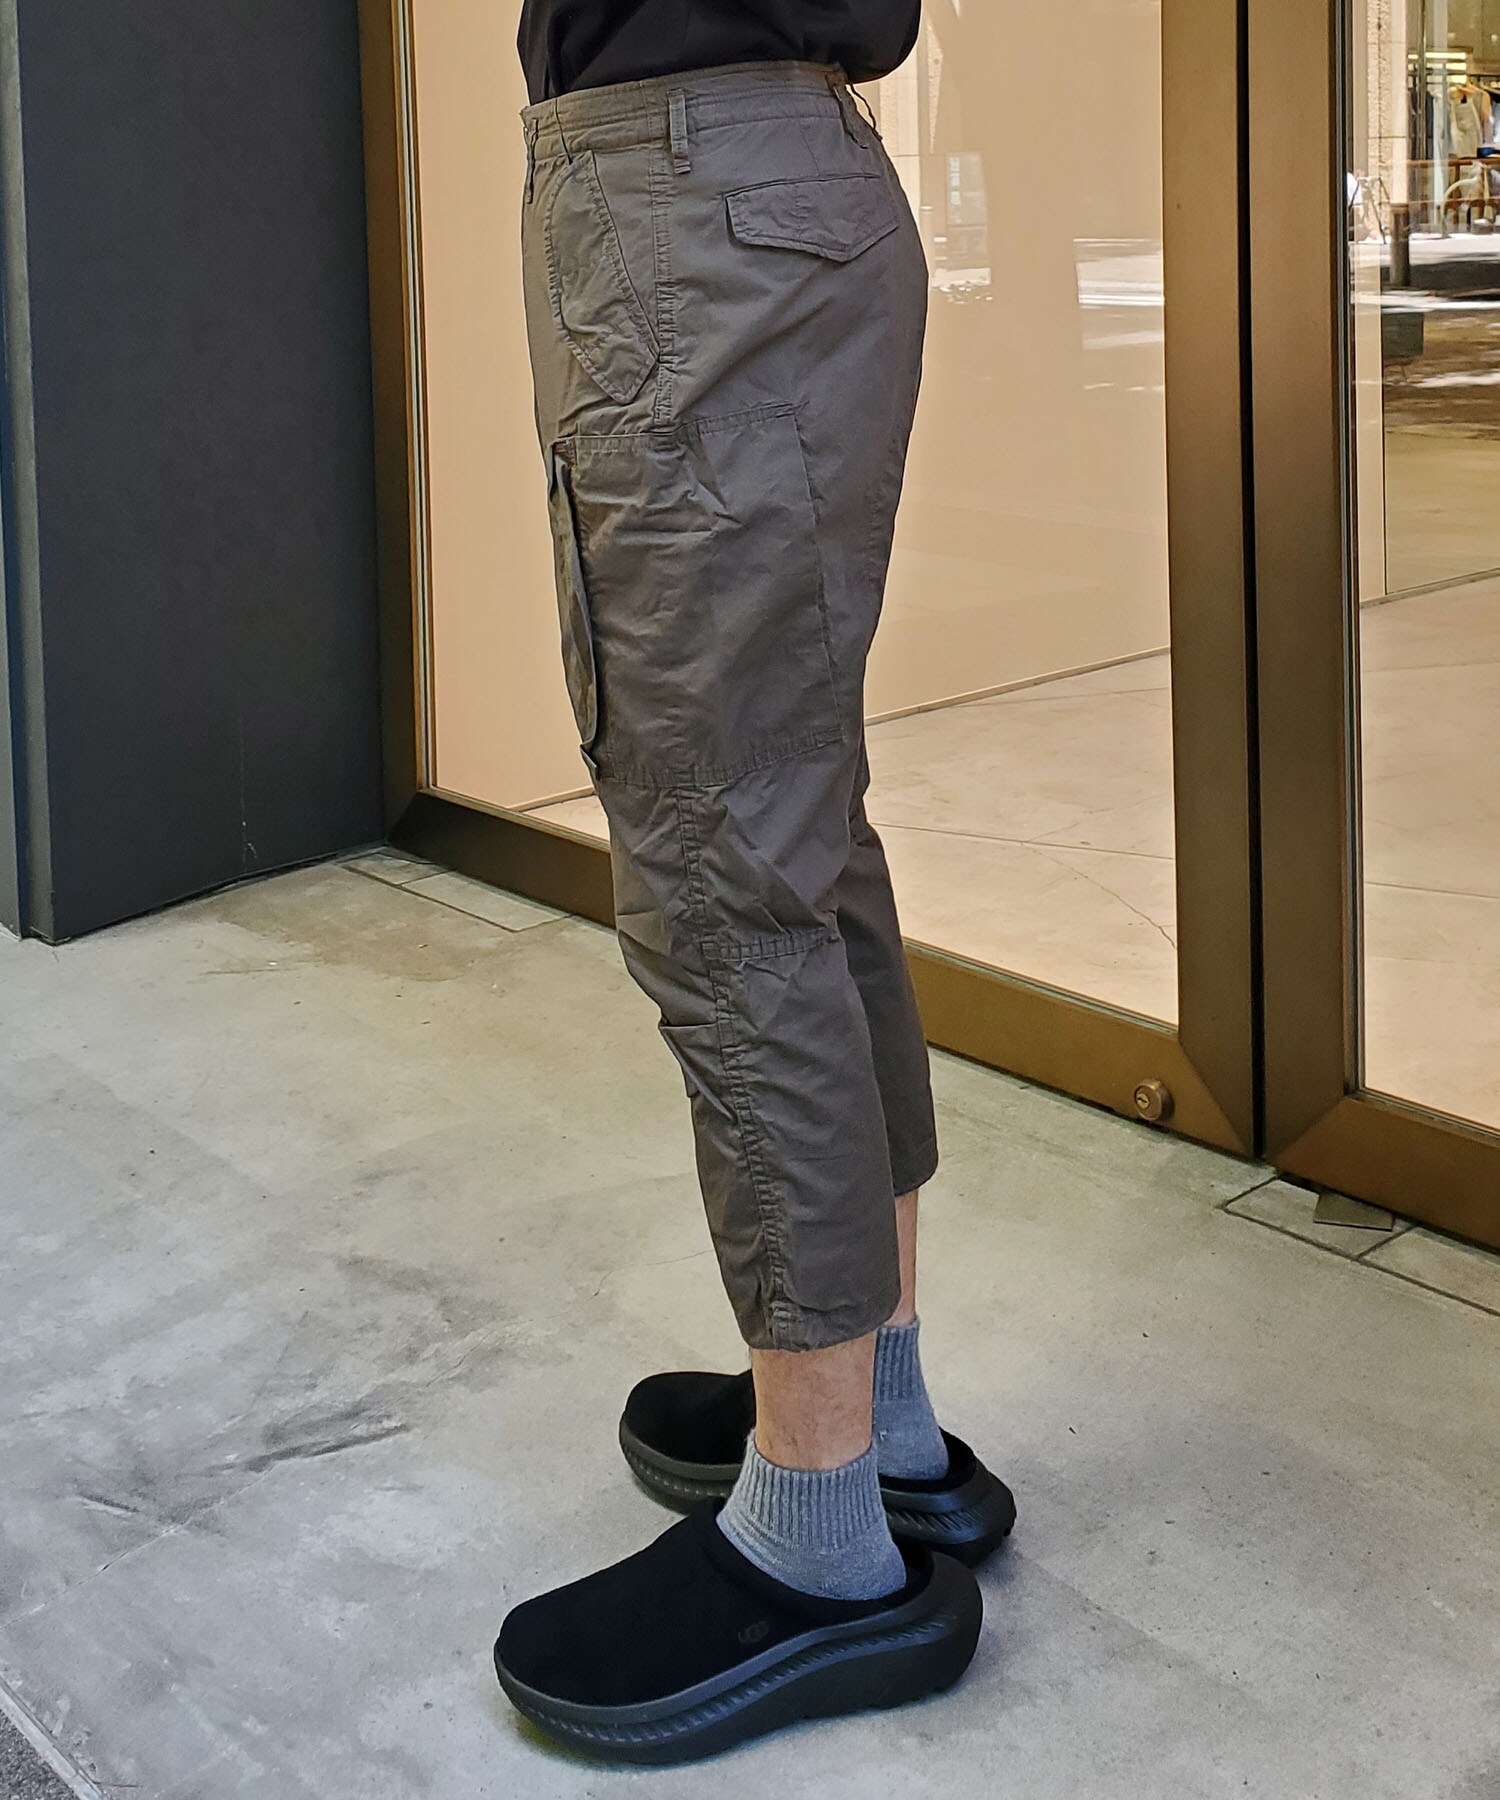 TROOPER 6P SHIN CUT TROUSERS RELAXED FIT COTTON TWILL nonnative